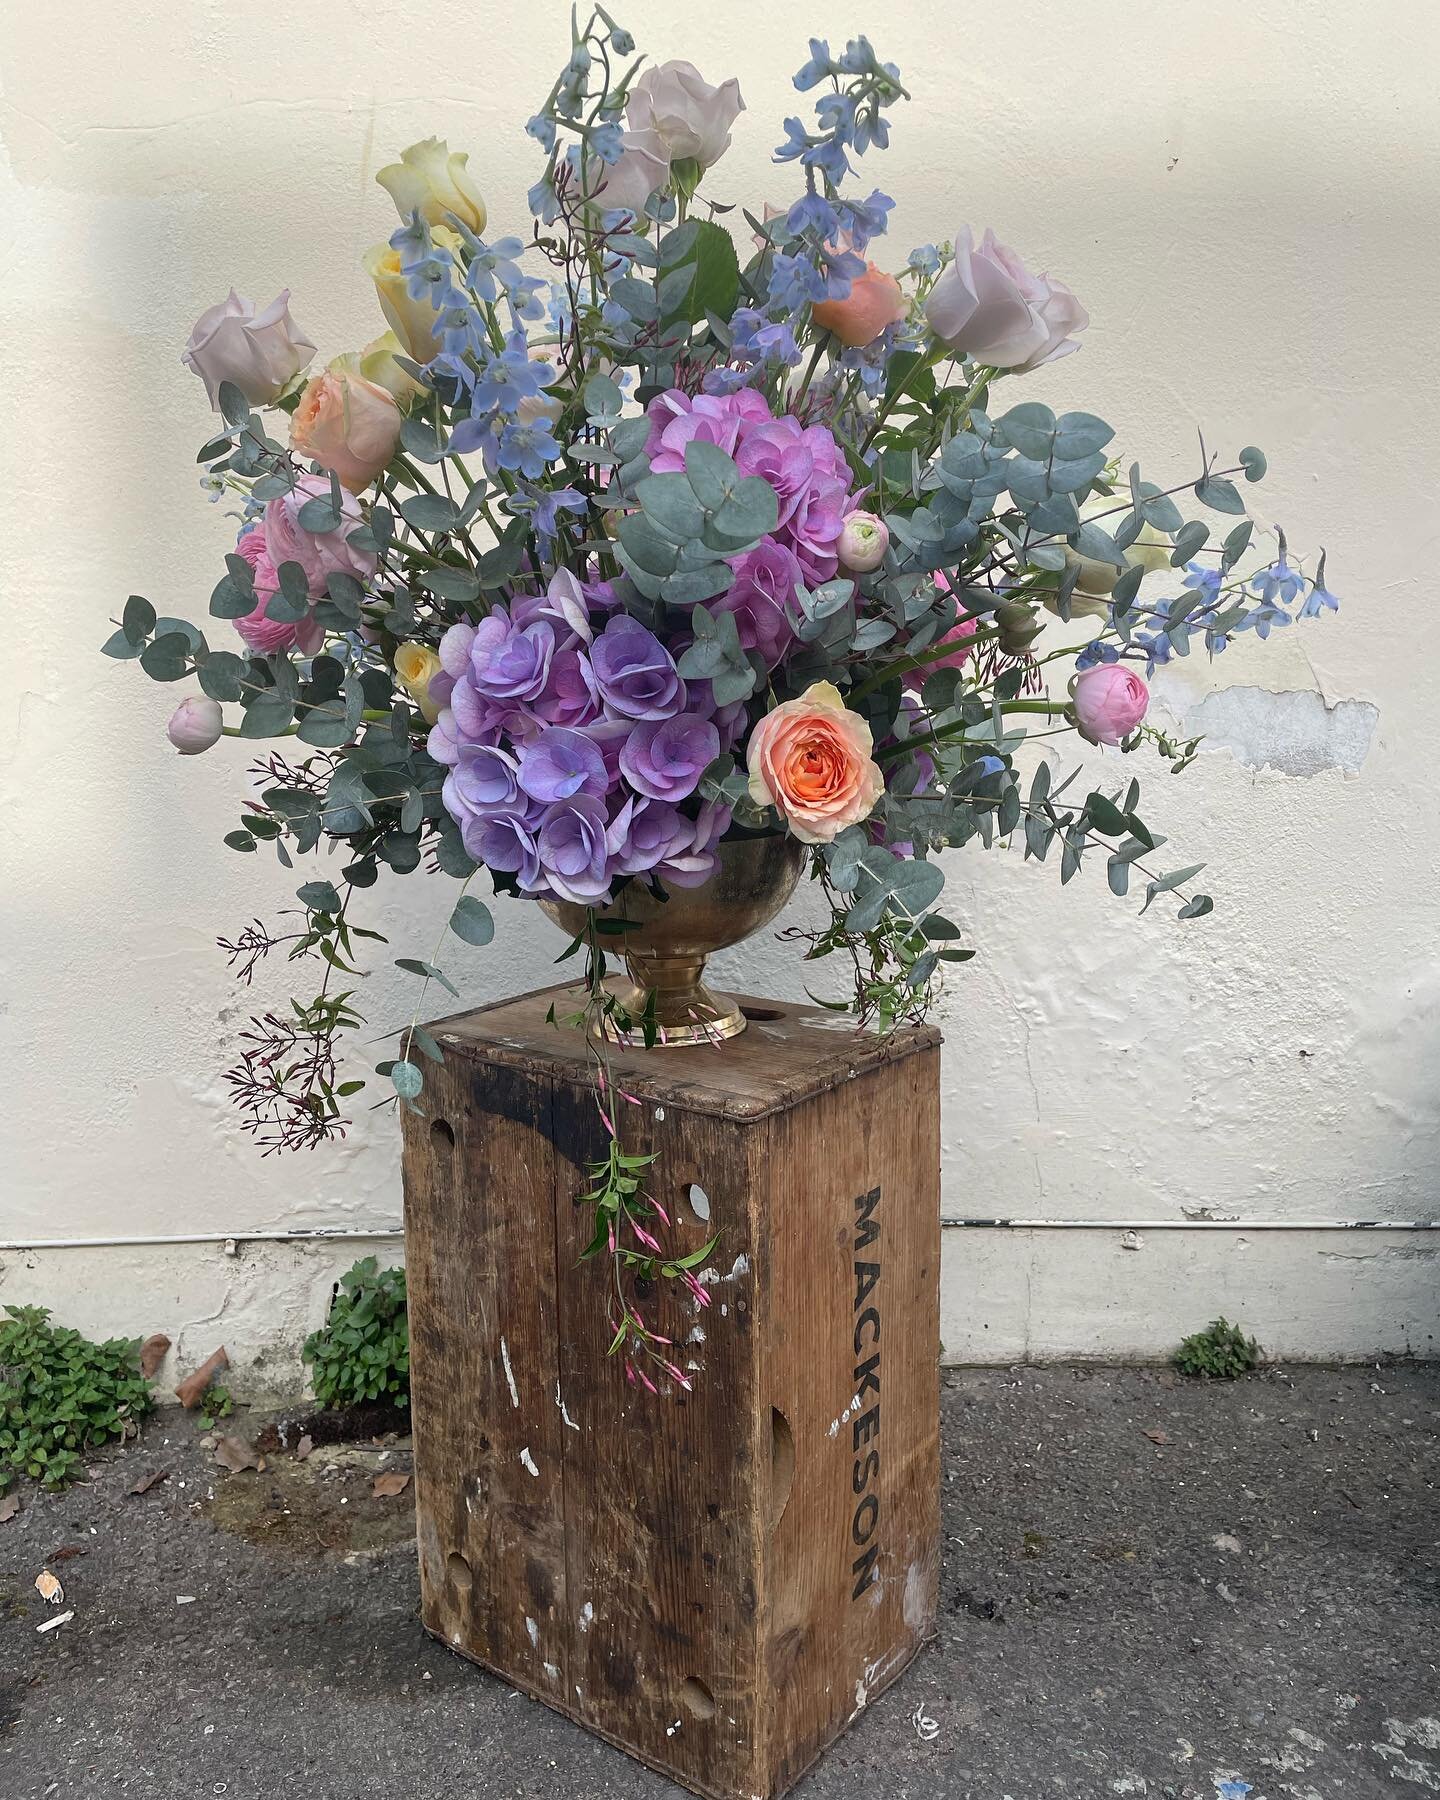 Another beaut for Cheltenham Jazz Festival! @cheltfestivals 

This is a great example of one of our wedding meadow bowl arrangements which look great down the aisle 🤍 get in touch to find out more if you&rsquo;re looking for a florist to flower your